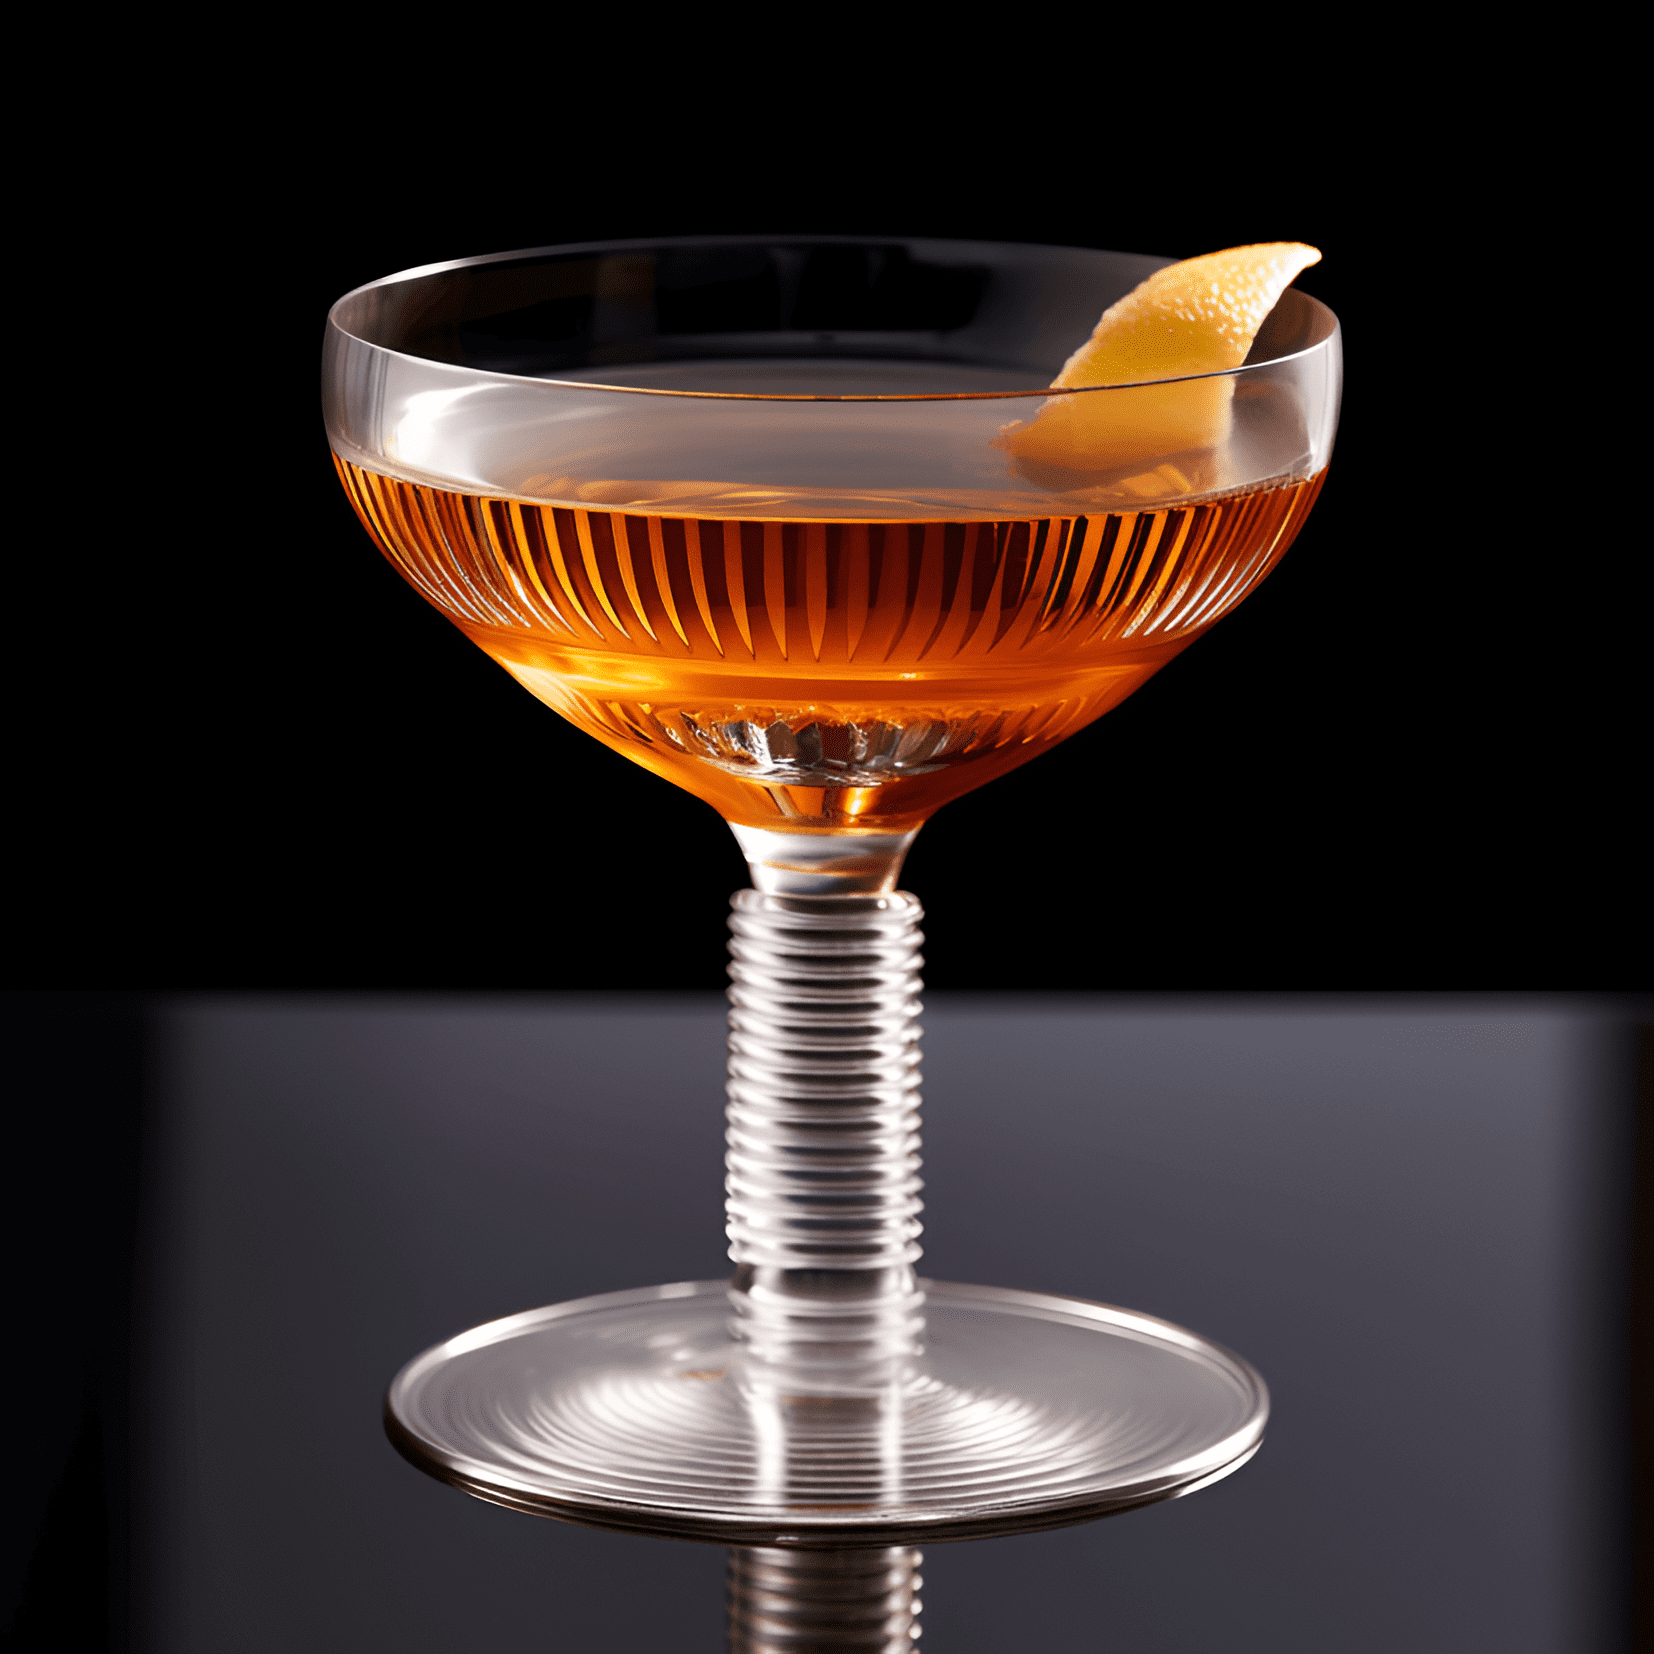 Adonis Cocktail Recipe - The Adonis cocktail is light, refreshing, and slightly sweet with a hint of bitterness. The combination of sherry and vermouth creates a complex and well-balanced flavor profile.